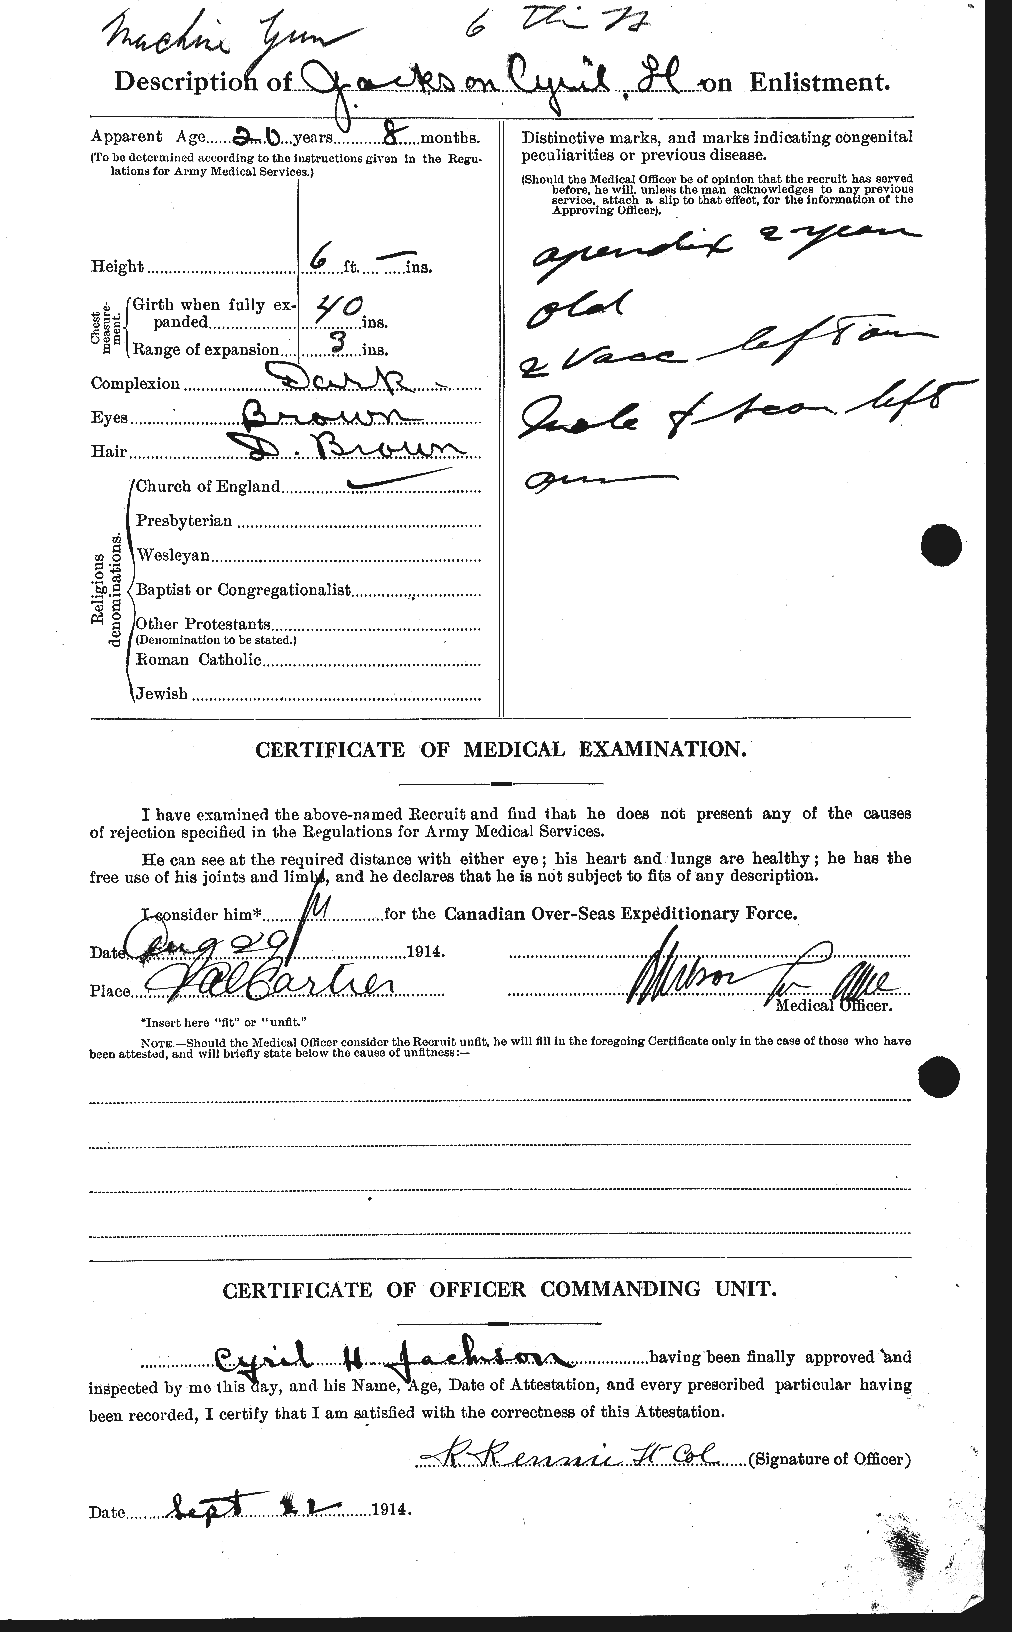 Personnel Records of the First World War - CEF 411857b